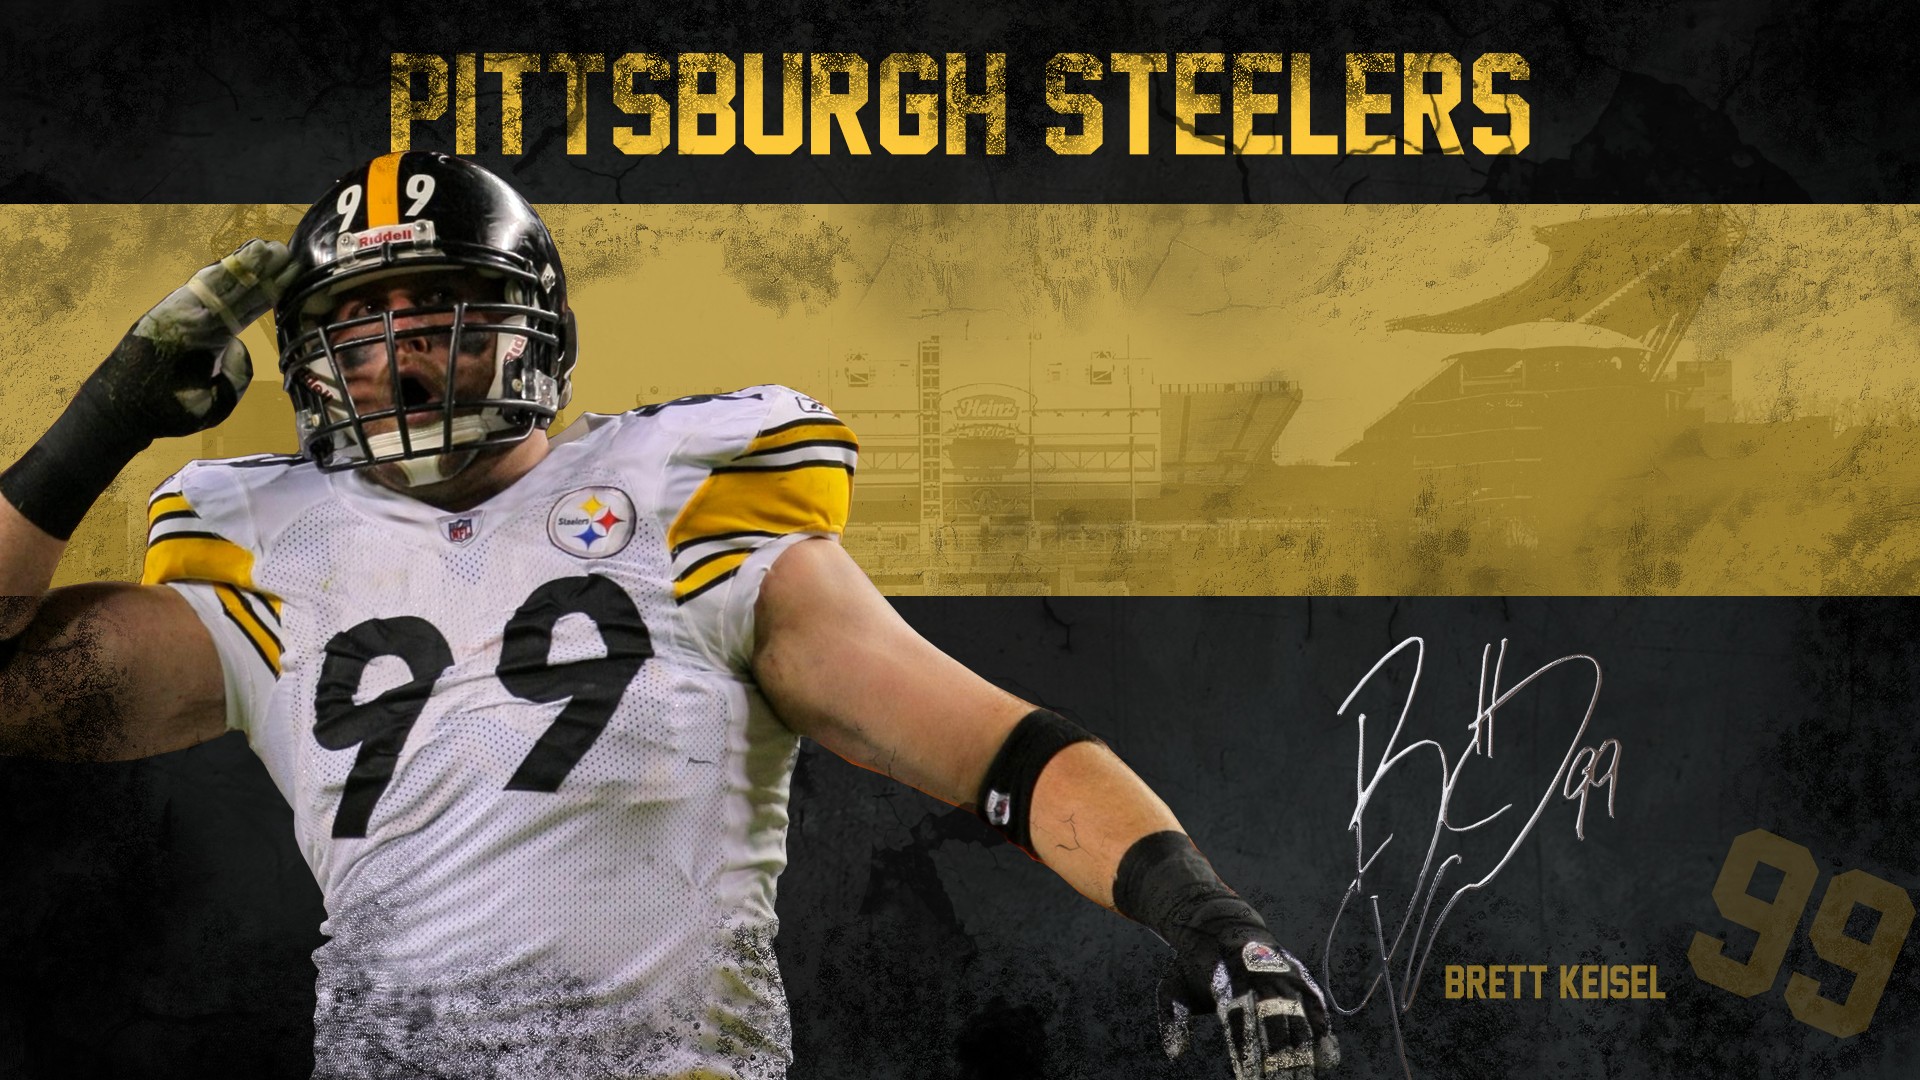 HD Pittsburgh Steelers Football Backgrounds with resolution 1920x1080 pixel. You can make this wallpaper for your Mac or Windows Desktop Background, iPhone, Android or Tablet and another Smartphone device